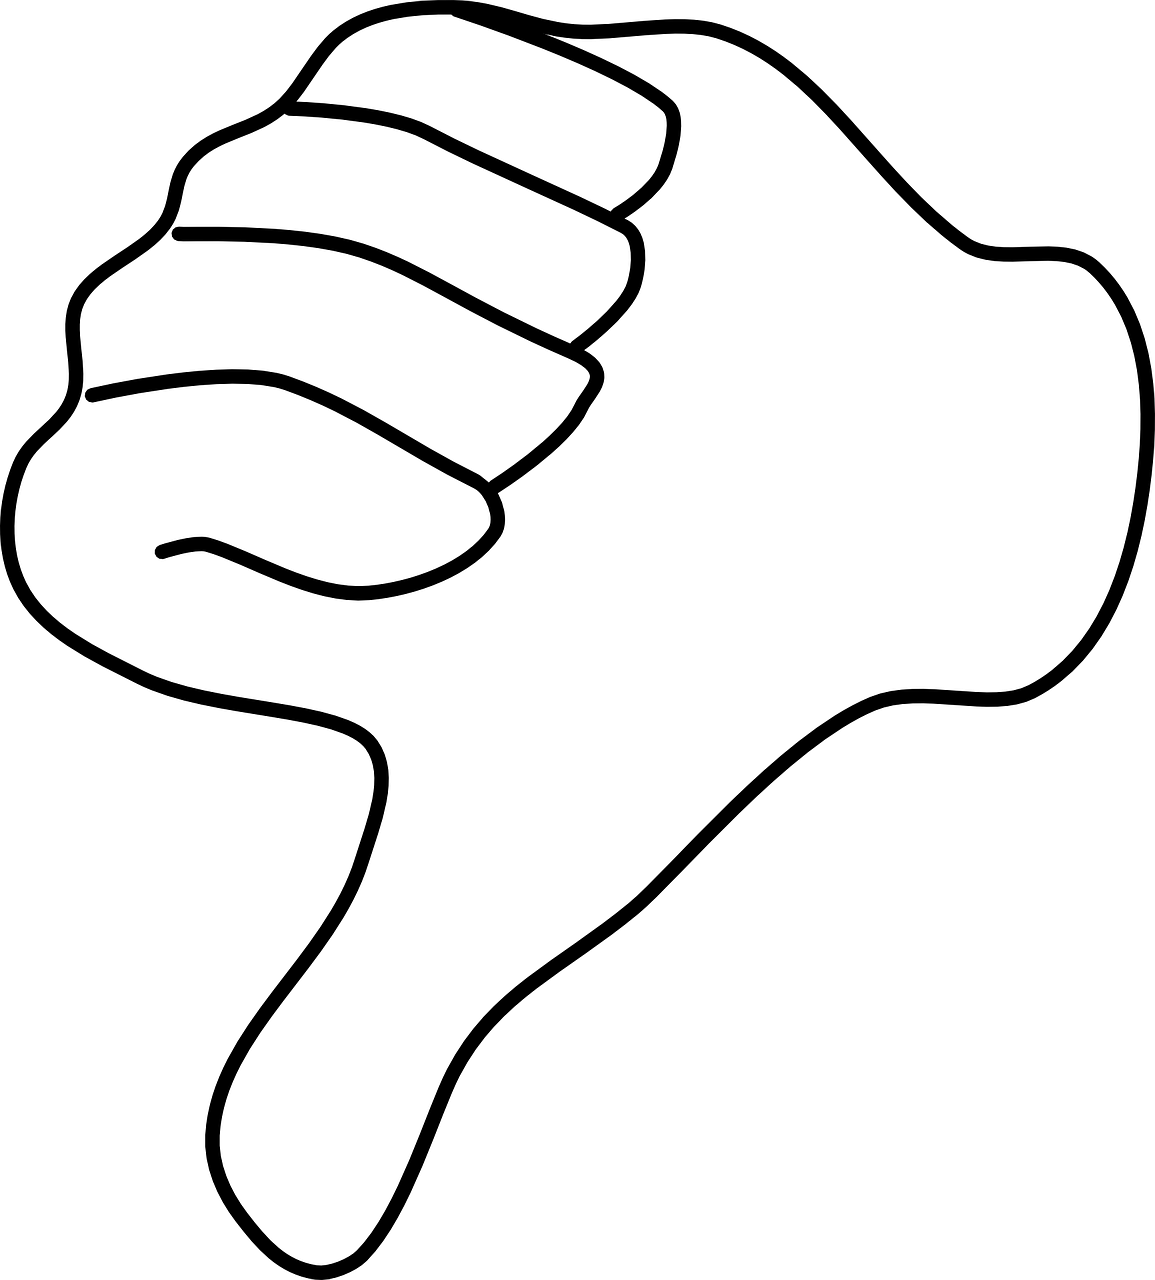 Against Favoritism - Thumb Down In White Png (1155x1280)